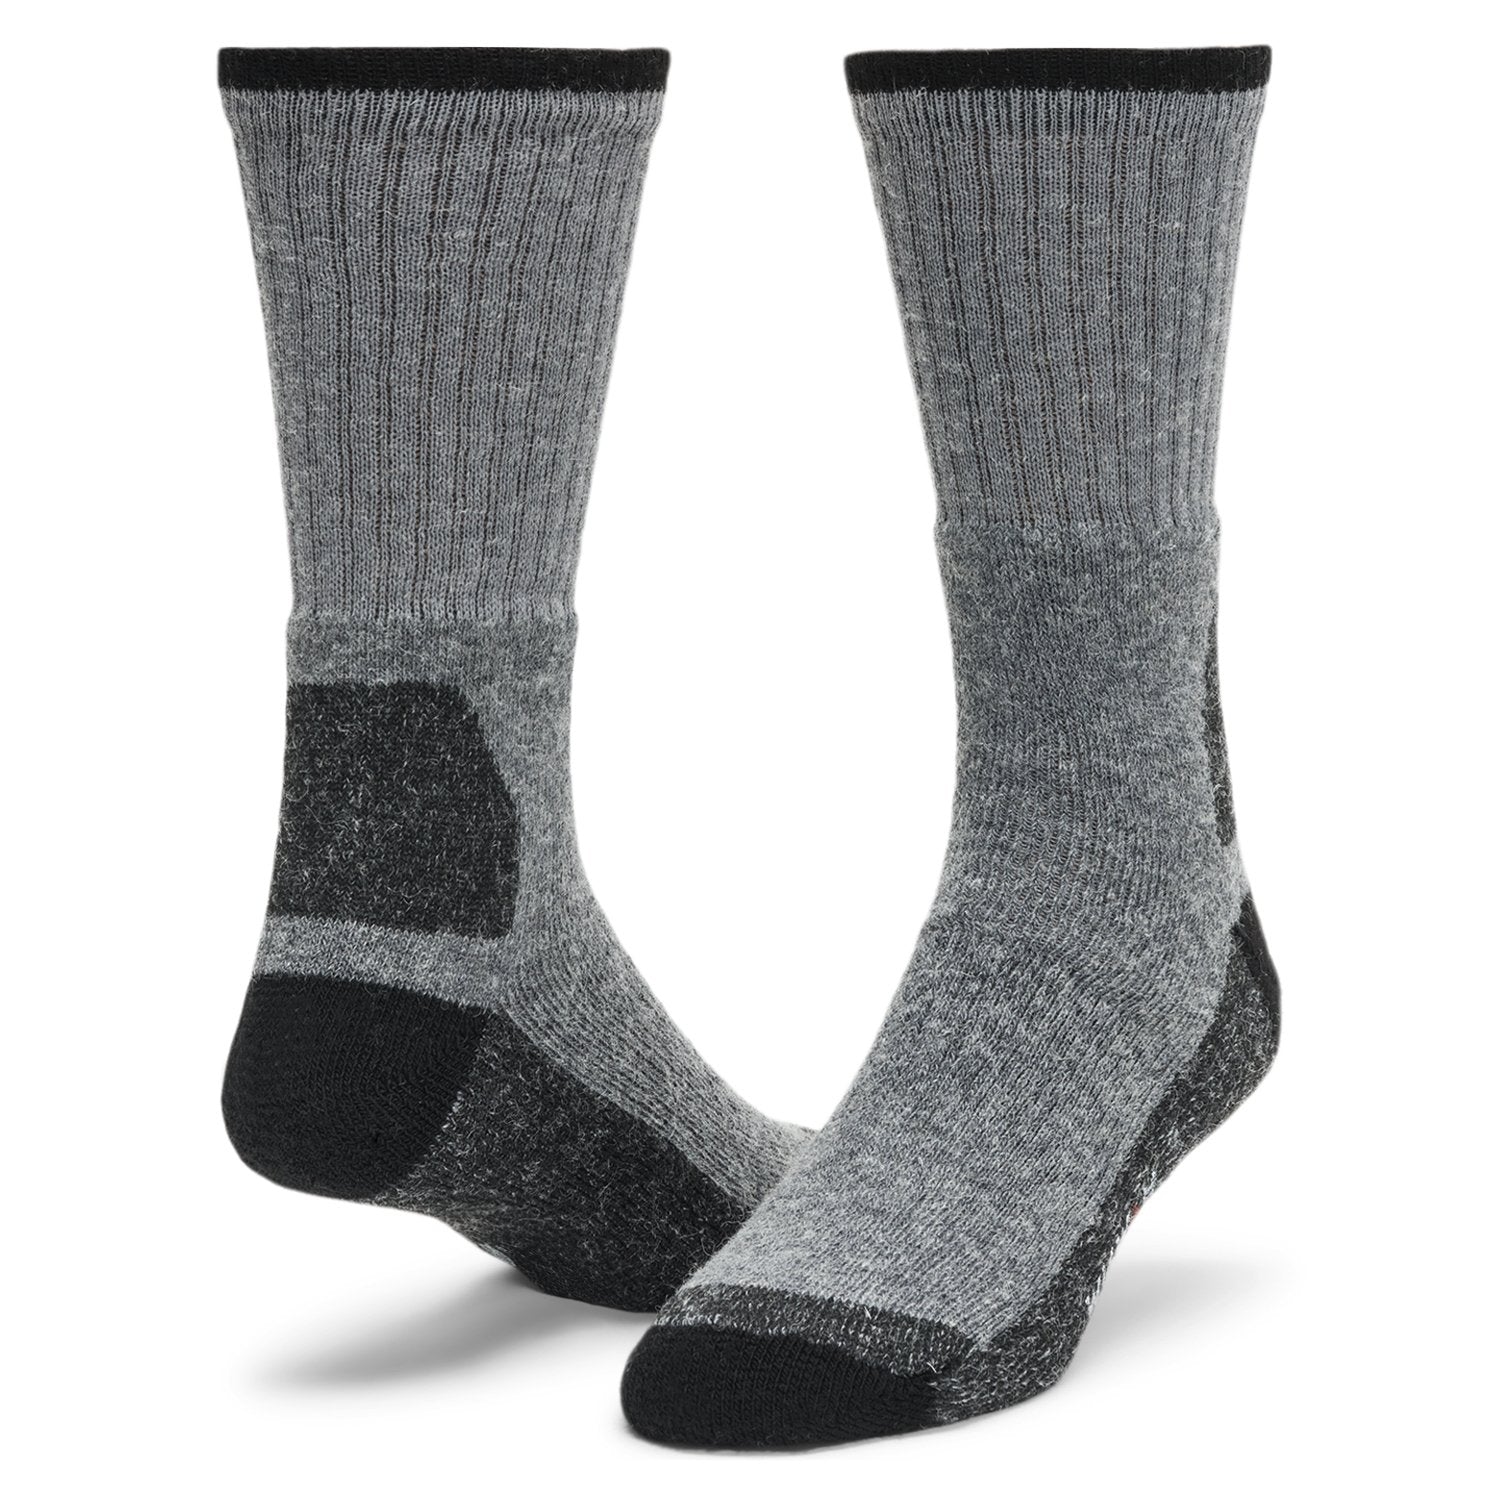 At Work Double Duty 2-Pack Socks with Wool - Grey full product perspective - made in The USA Wigwam Socks